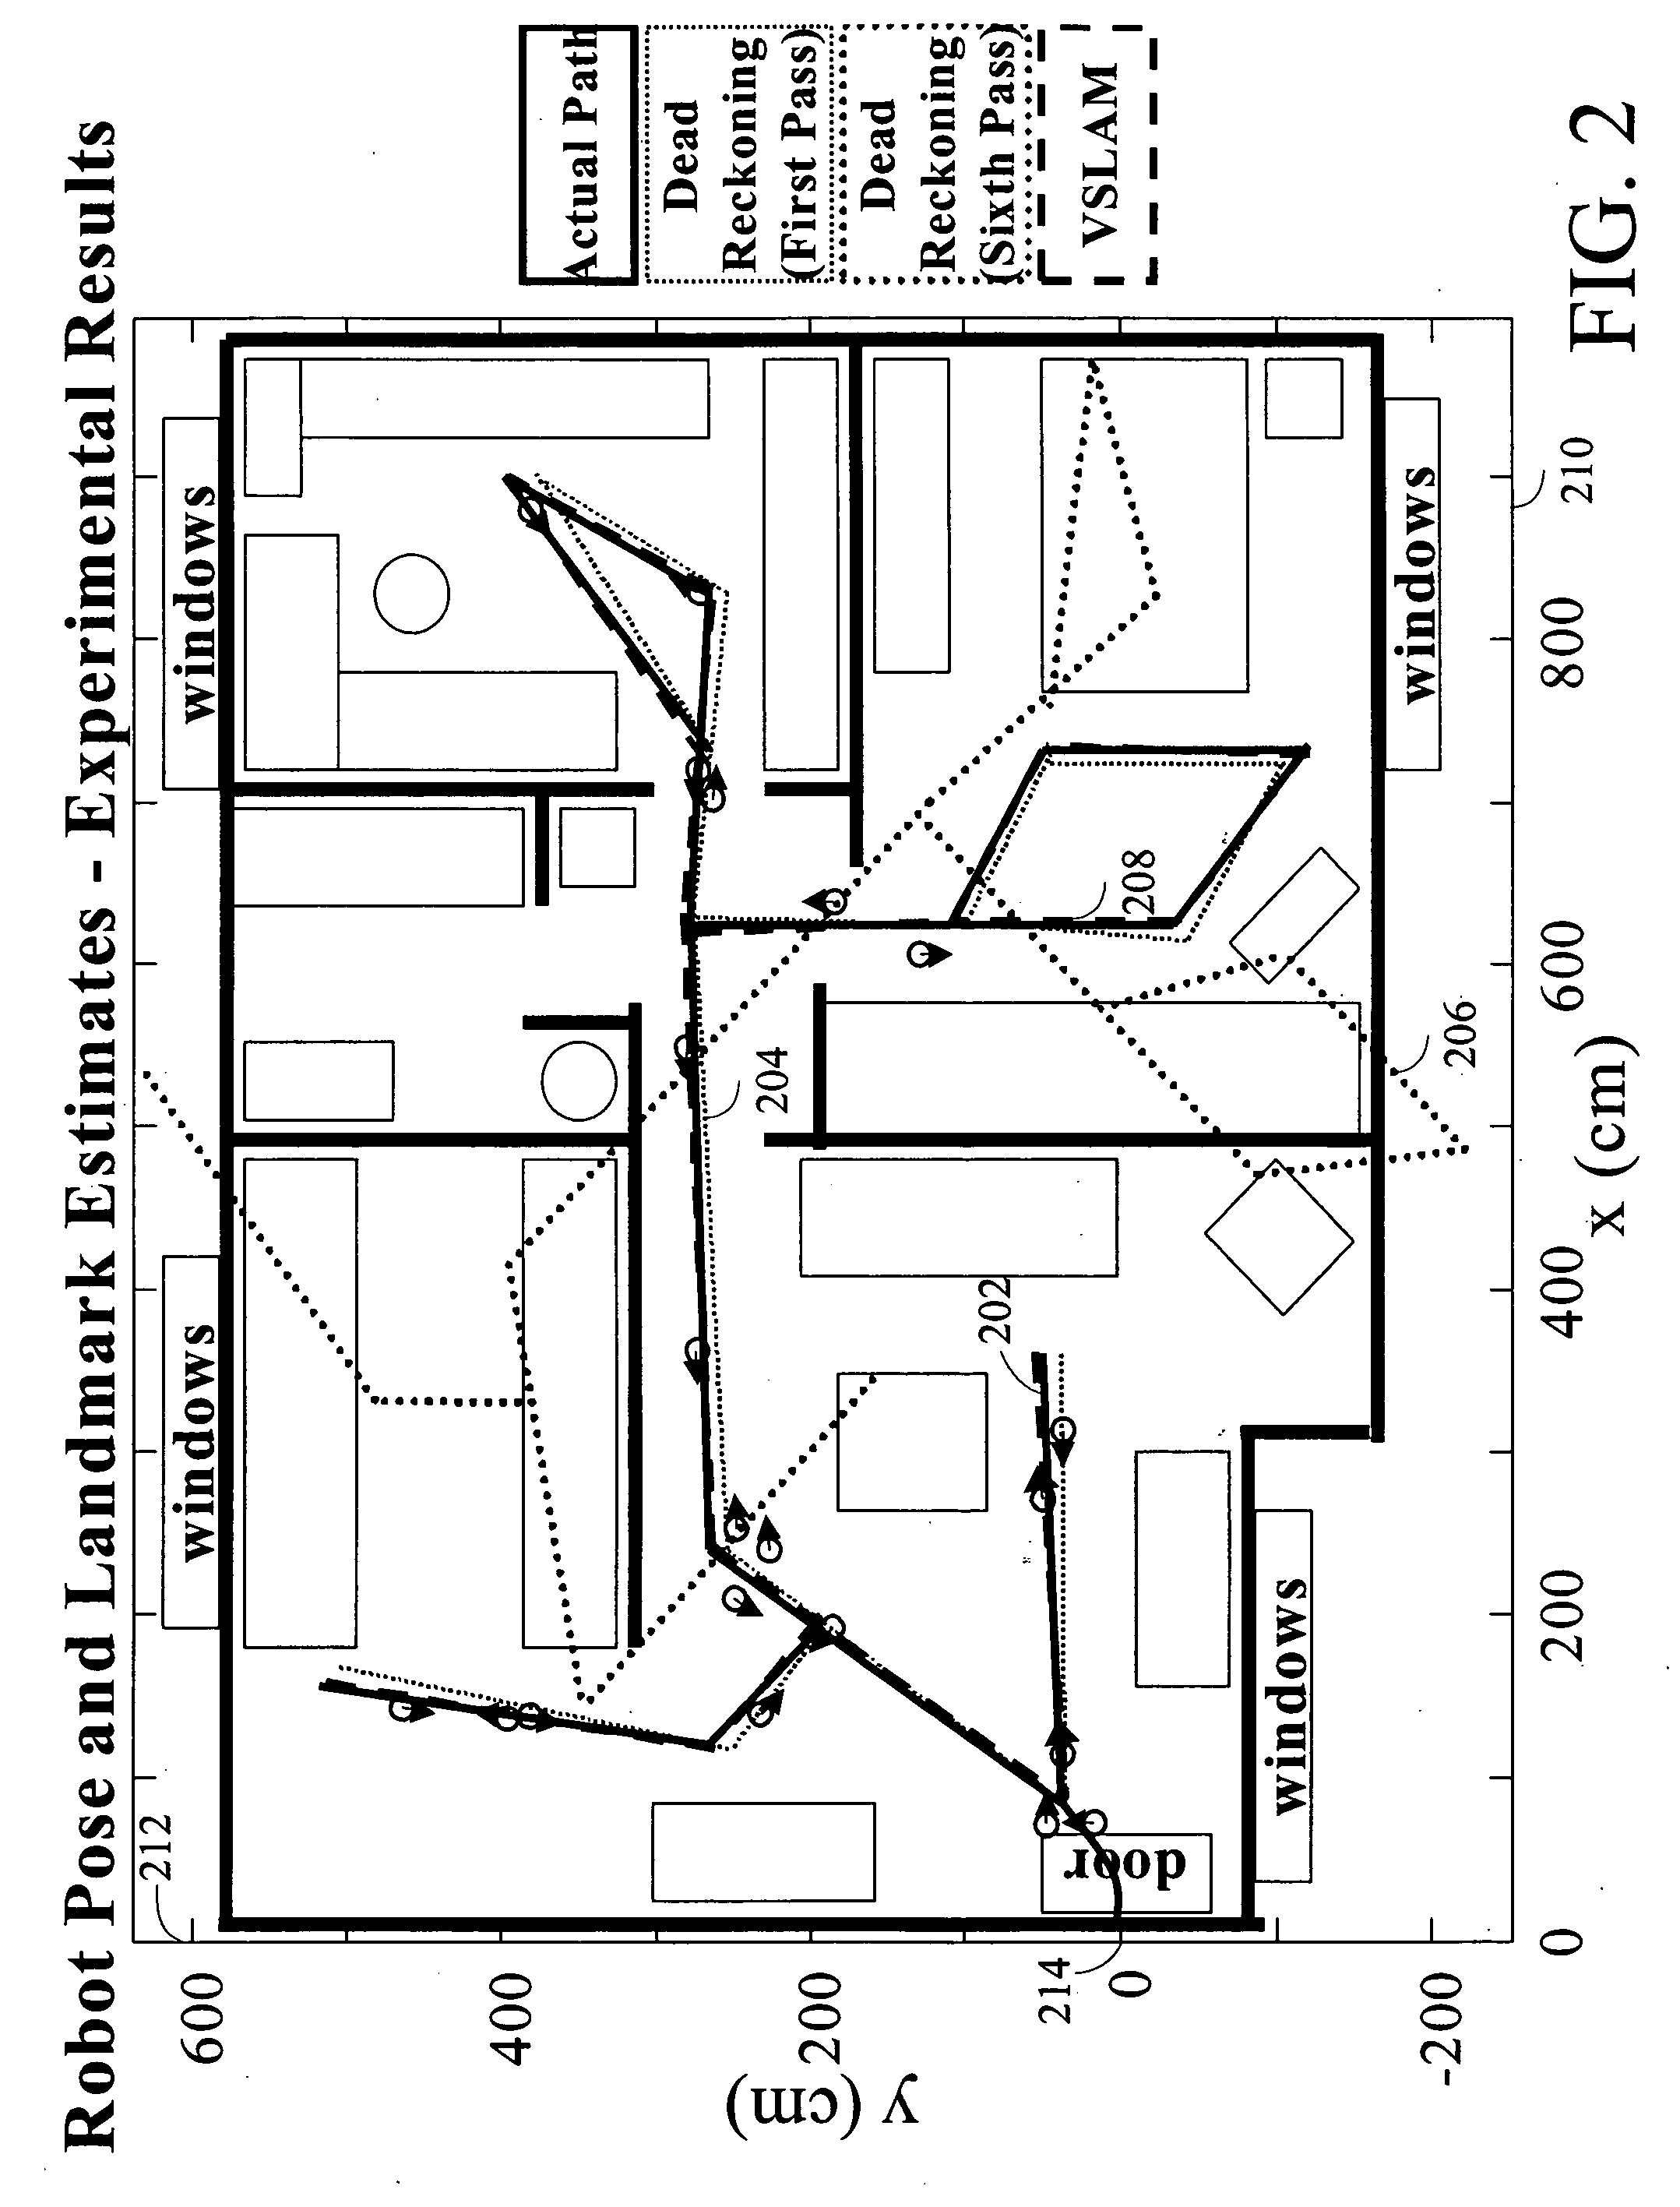 Systems and methods for incrementally updating a pose of a mobile device calculated by visual simultaneous localization and mapping techniques